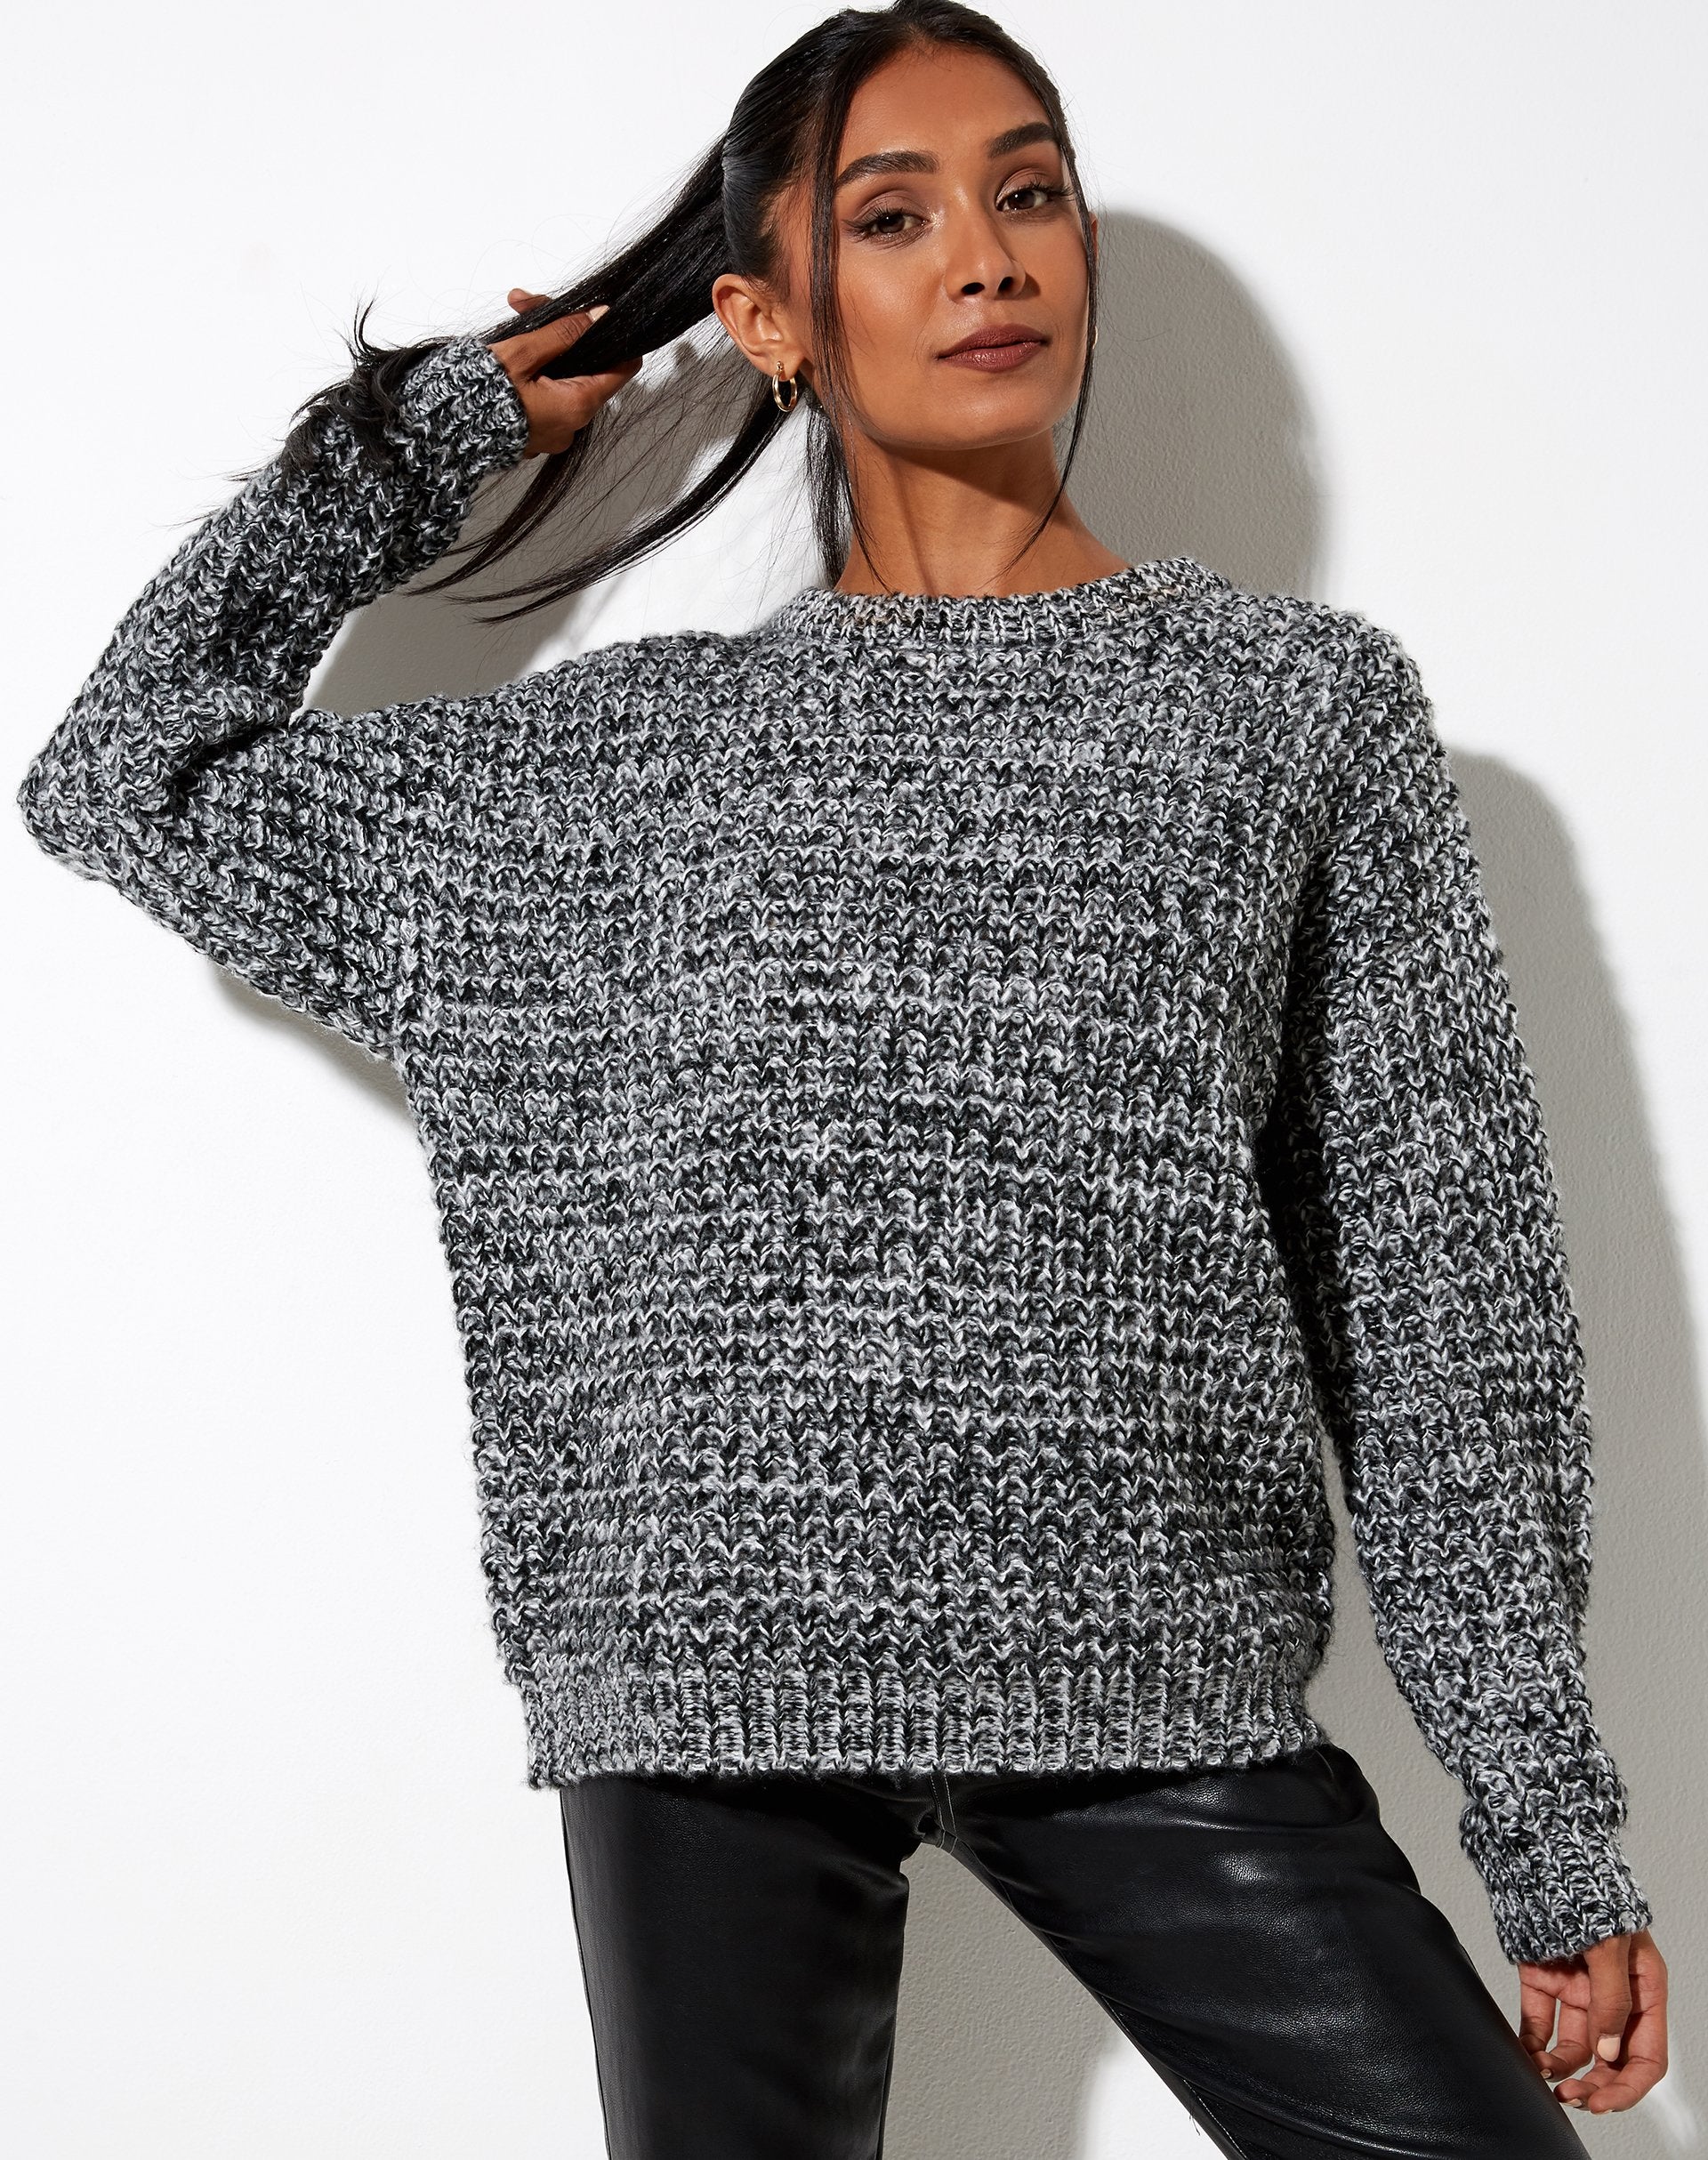 Image of Caribou Jumper in Chunky Knit Black Grey and White